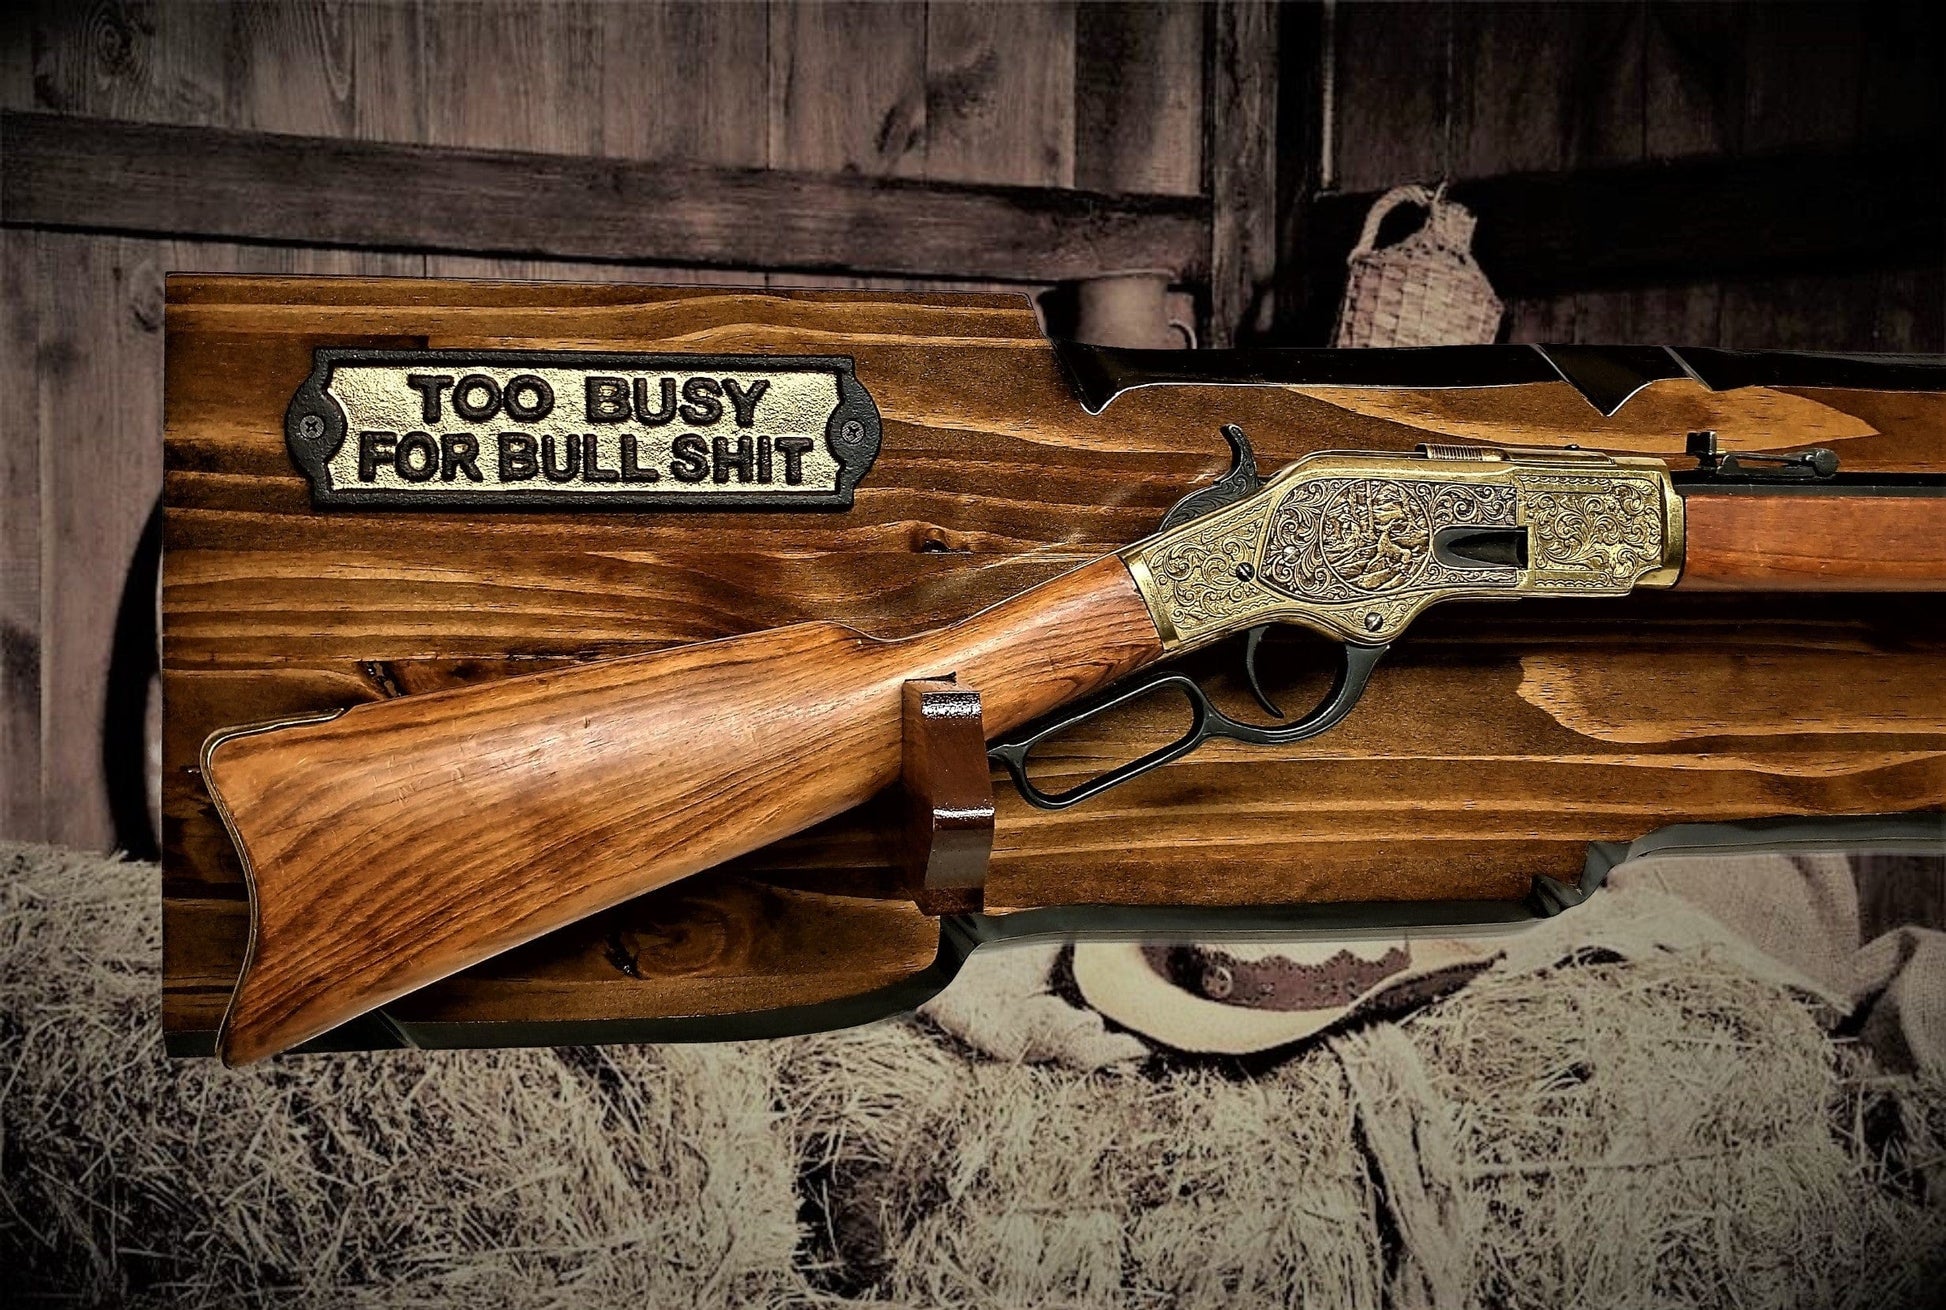 walkerwoodgifts gun rack Unique Gun Display Designed for Lever Action Rifle "Too Busy For BS" Great Man Cave Western Decor